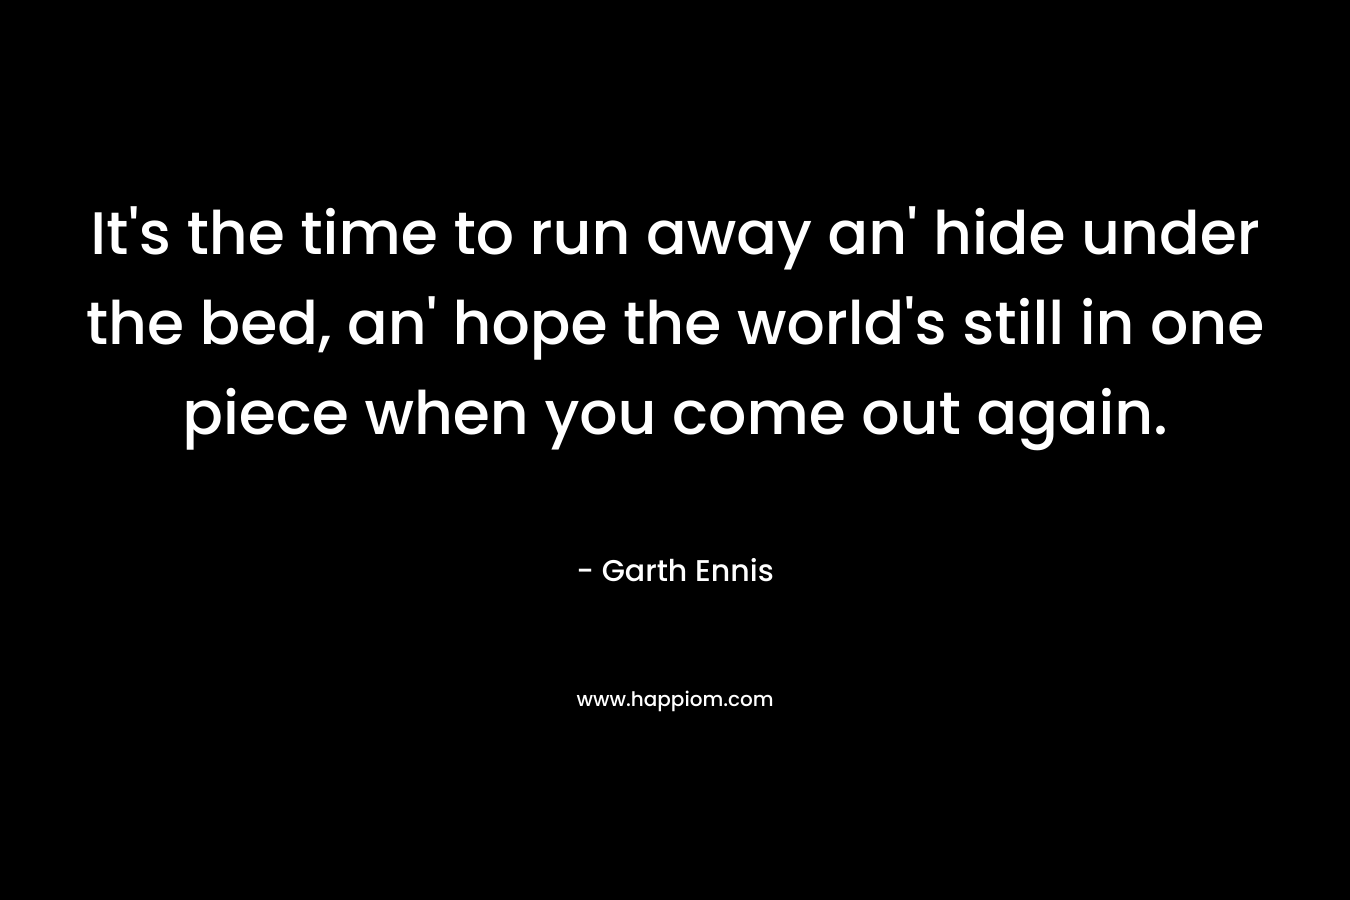 It’s the time to run away an’ hide under the bed, an’ hope the world’s still in one piece when you come out again. – Garth Ennis